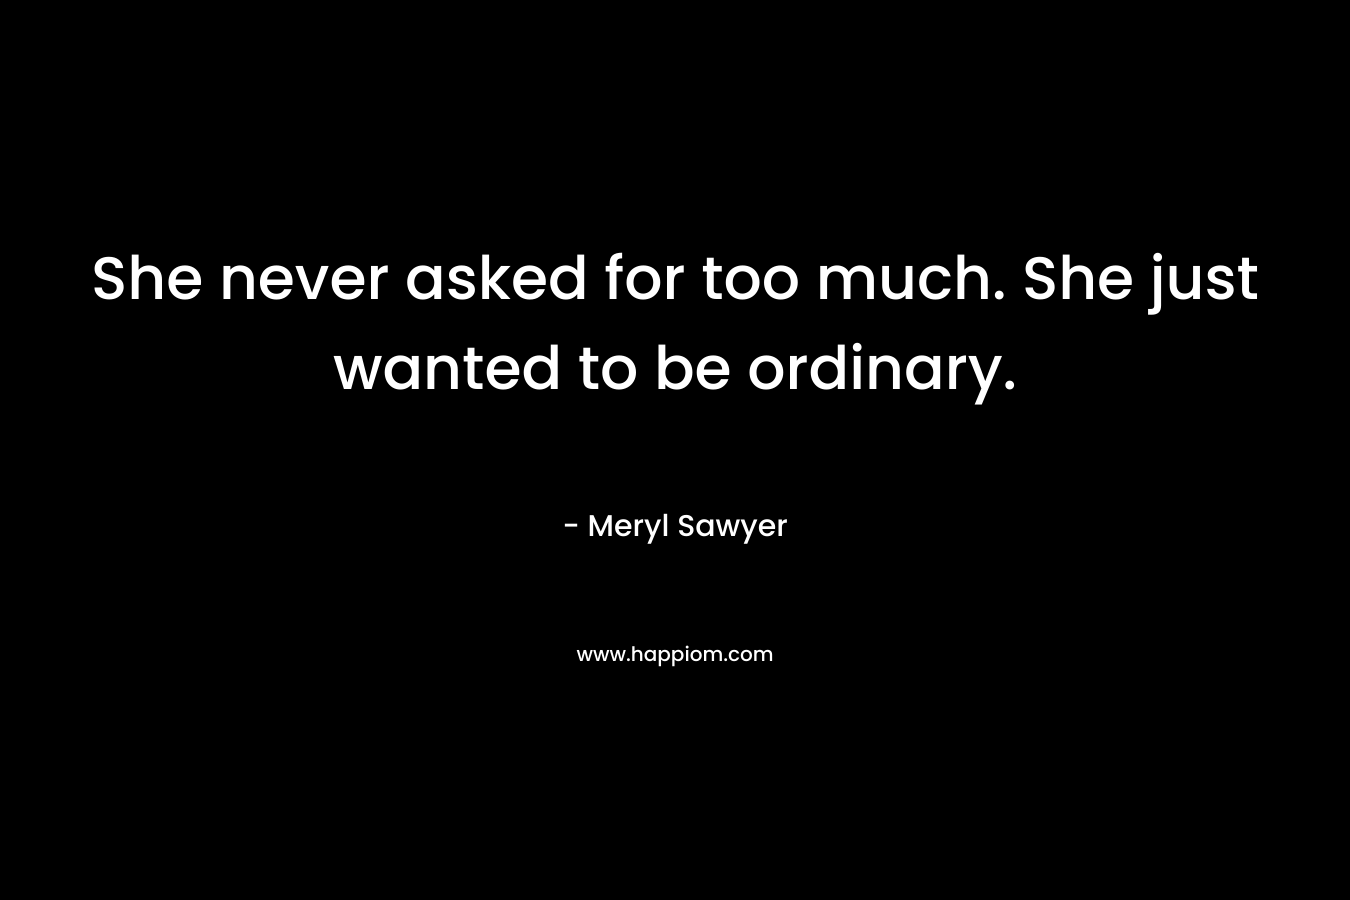 She never asked for too much. She just wanted to be ordinary. – Meryl Sawyer